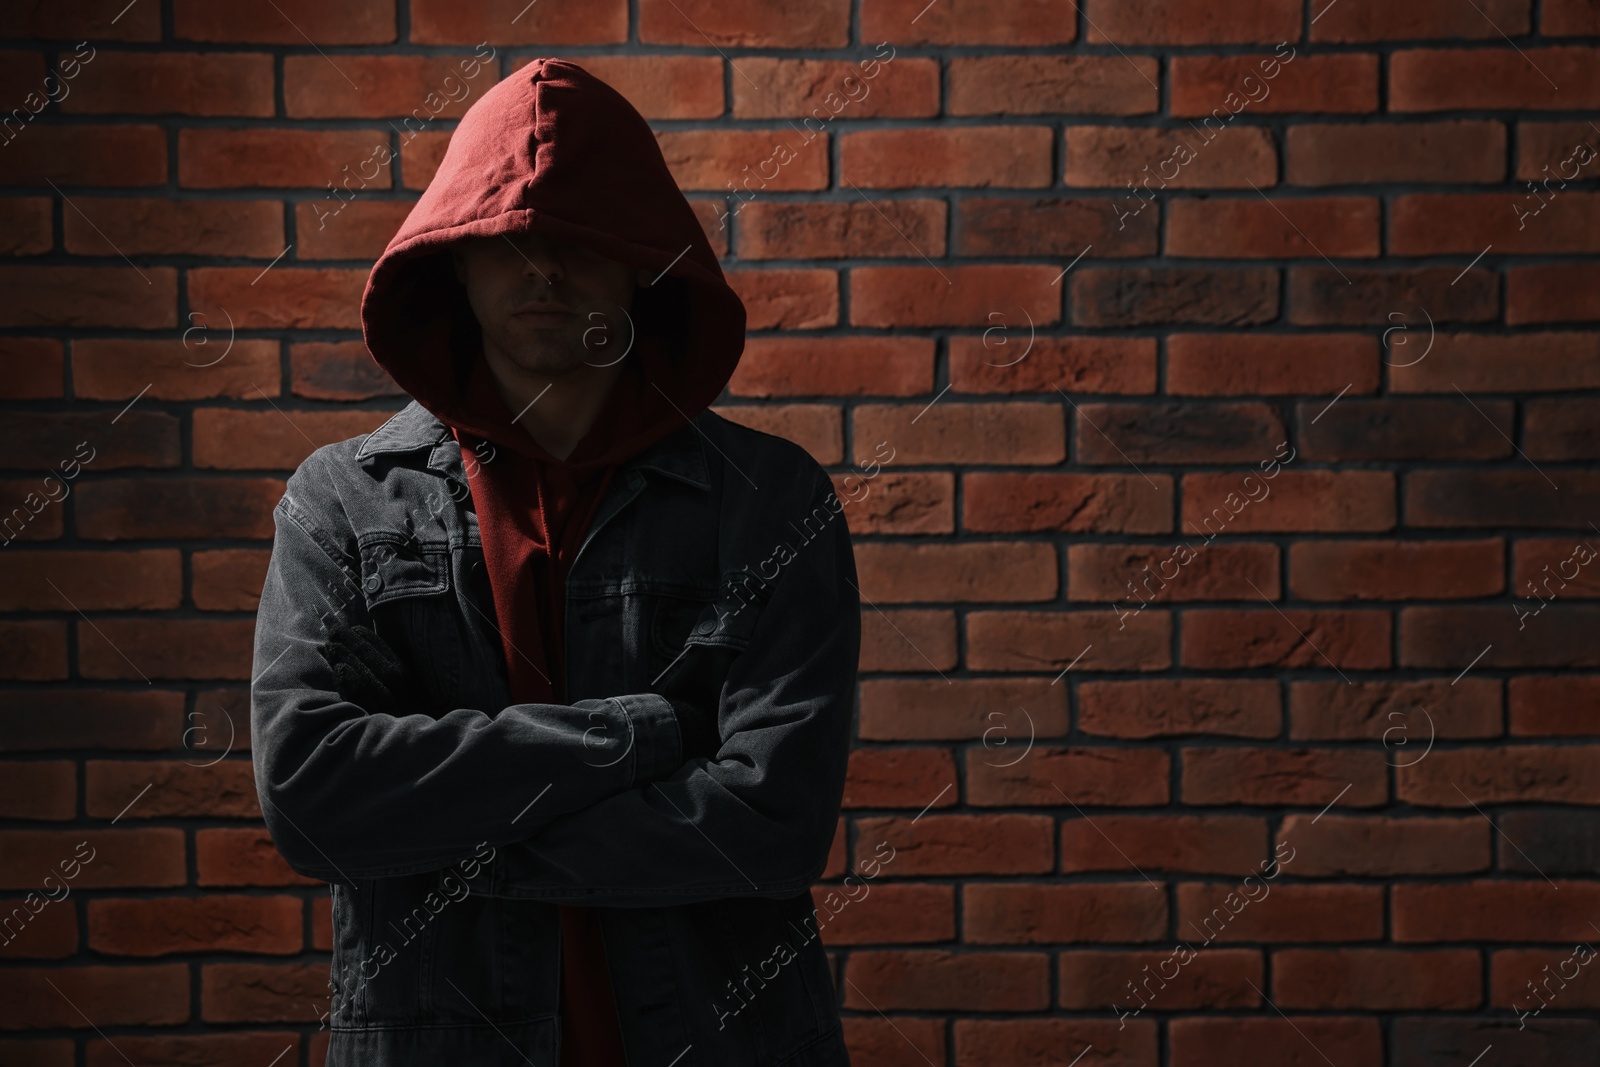 Photo of Thief in hoodie with crossed arms against red brick wall. Space for text